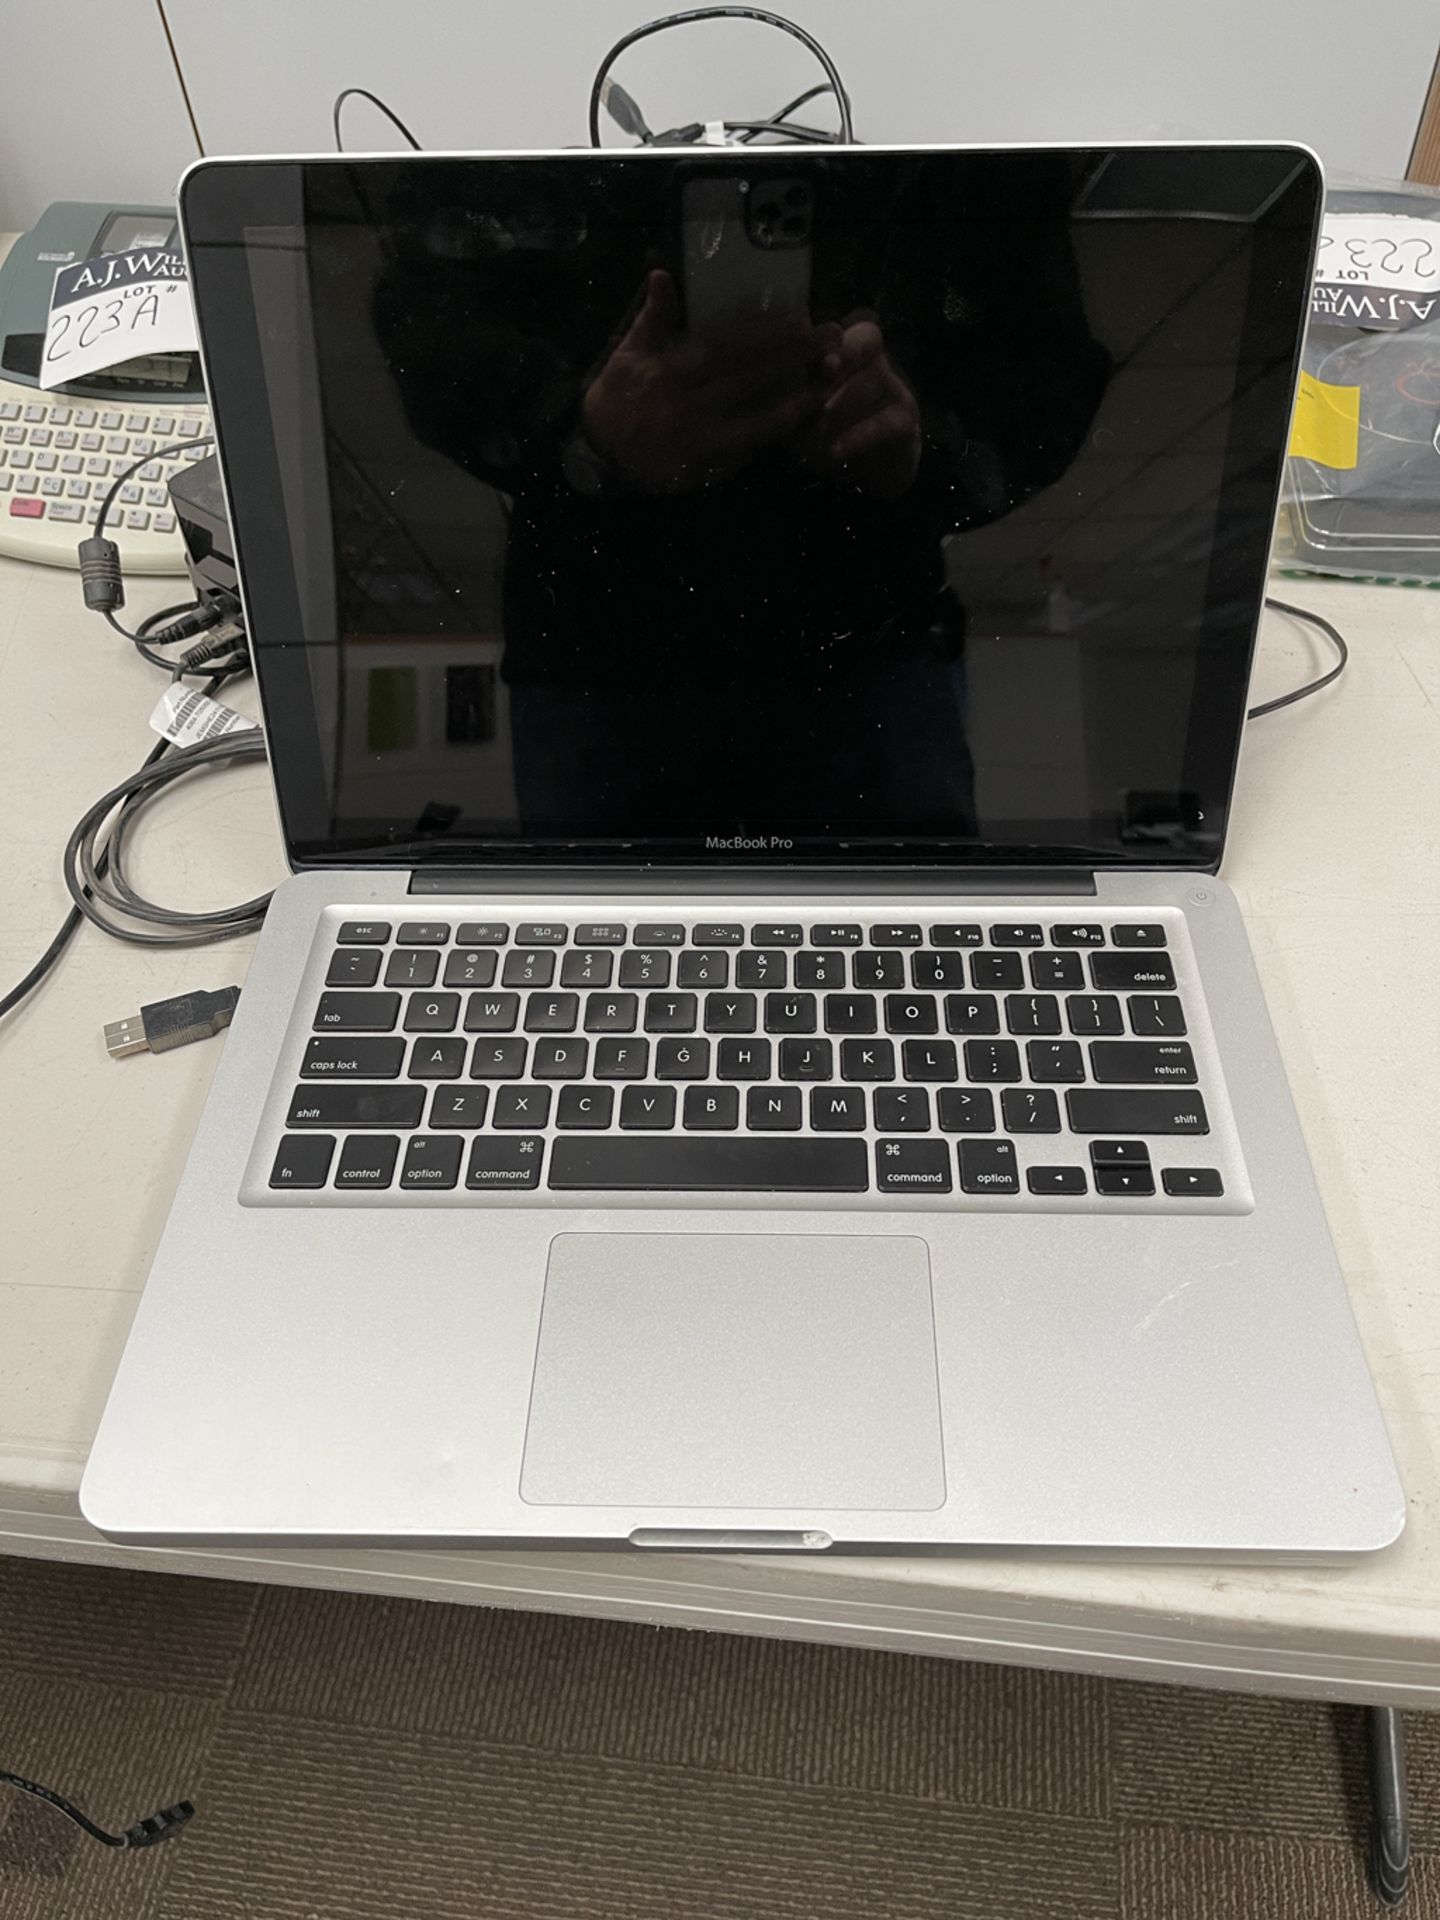 Apple MacBook Pro a1278 - No power cord - working